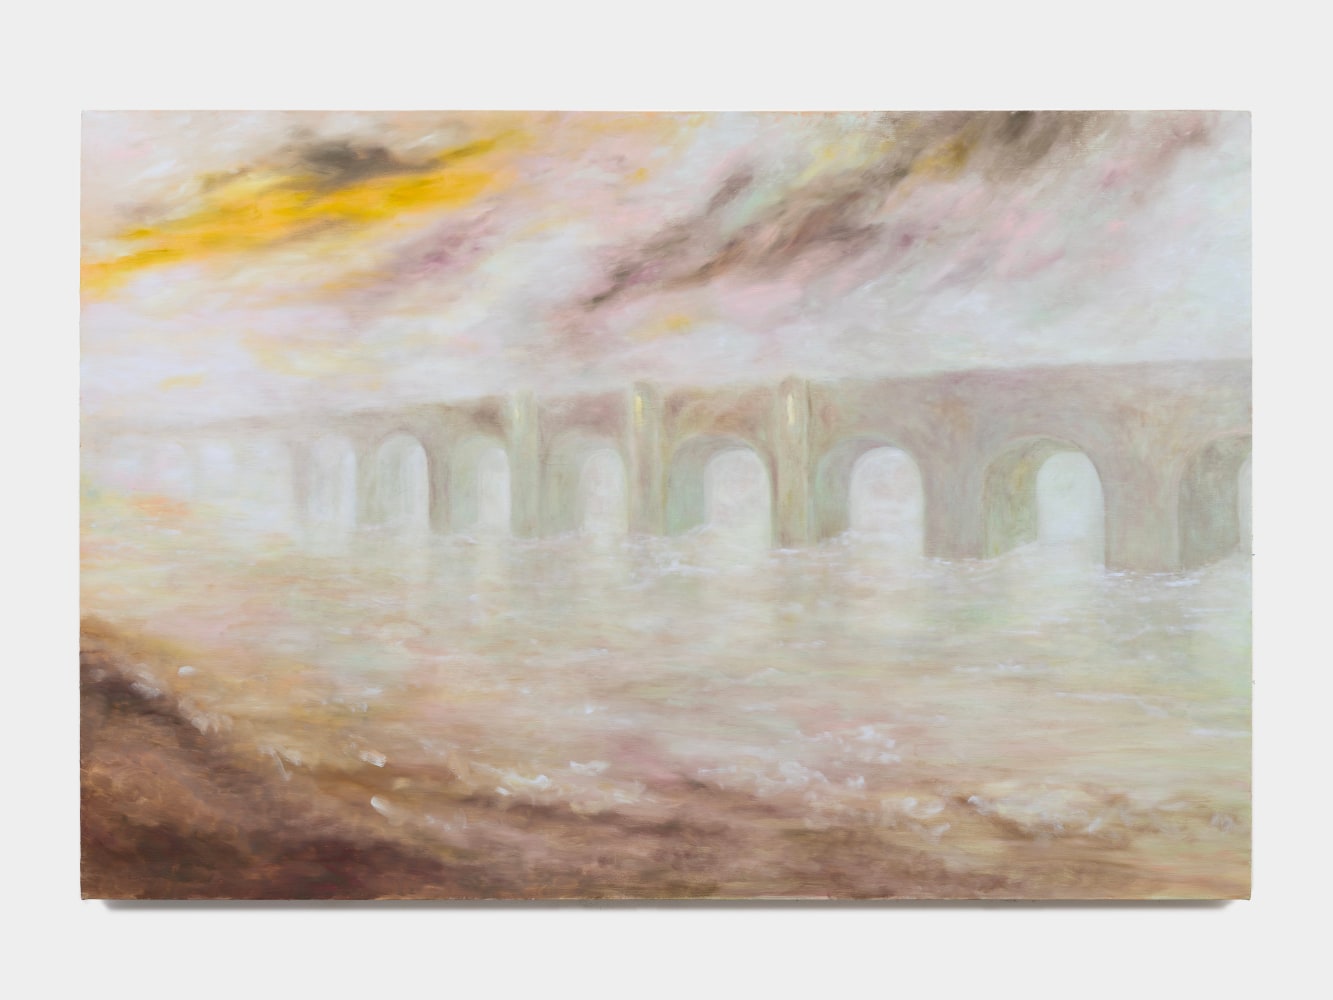 A painting of an acqueduct in foggy green tinted water with purple and yellow blustery clouds above.